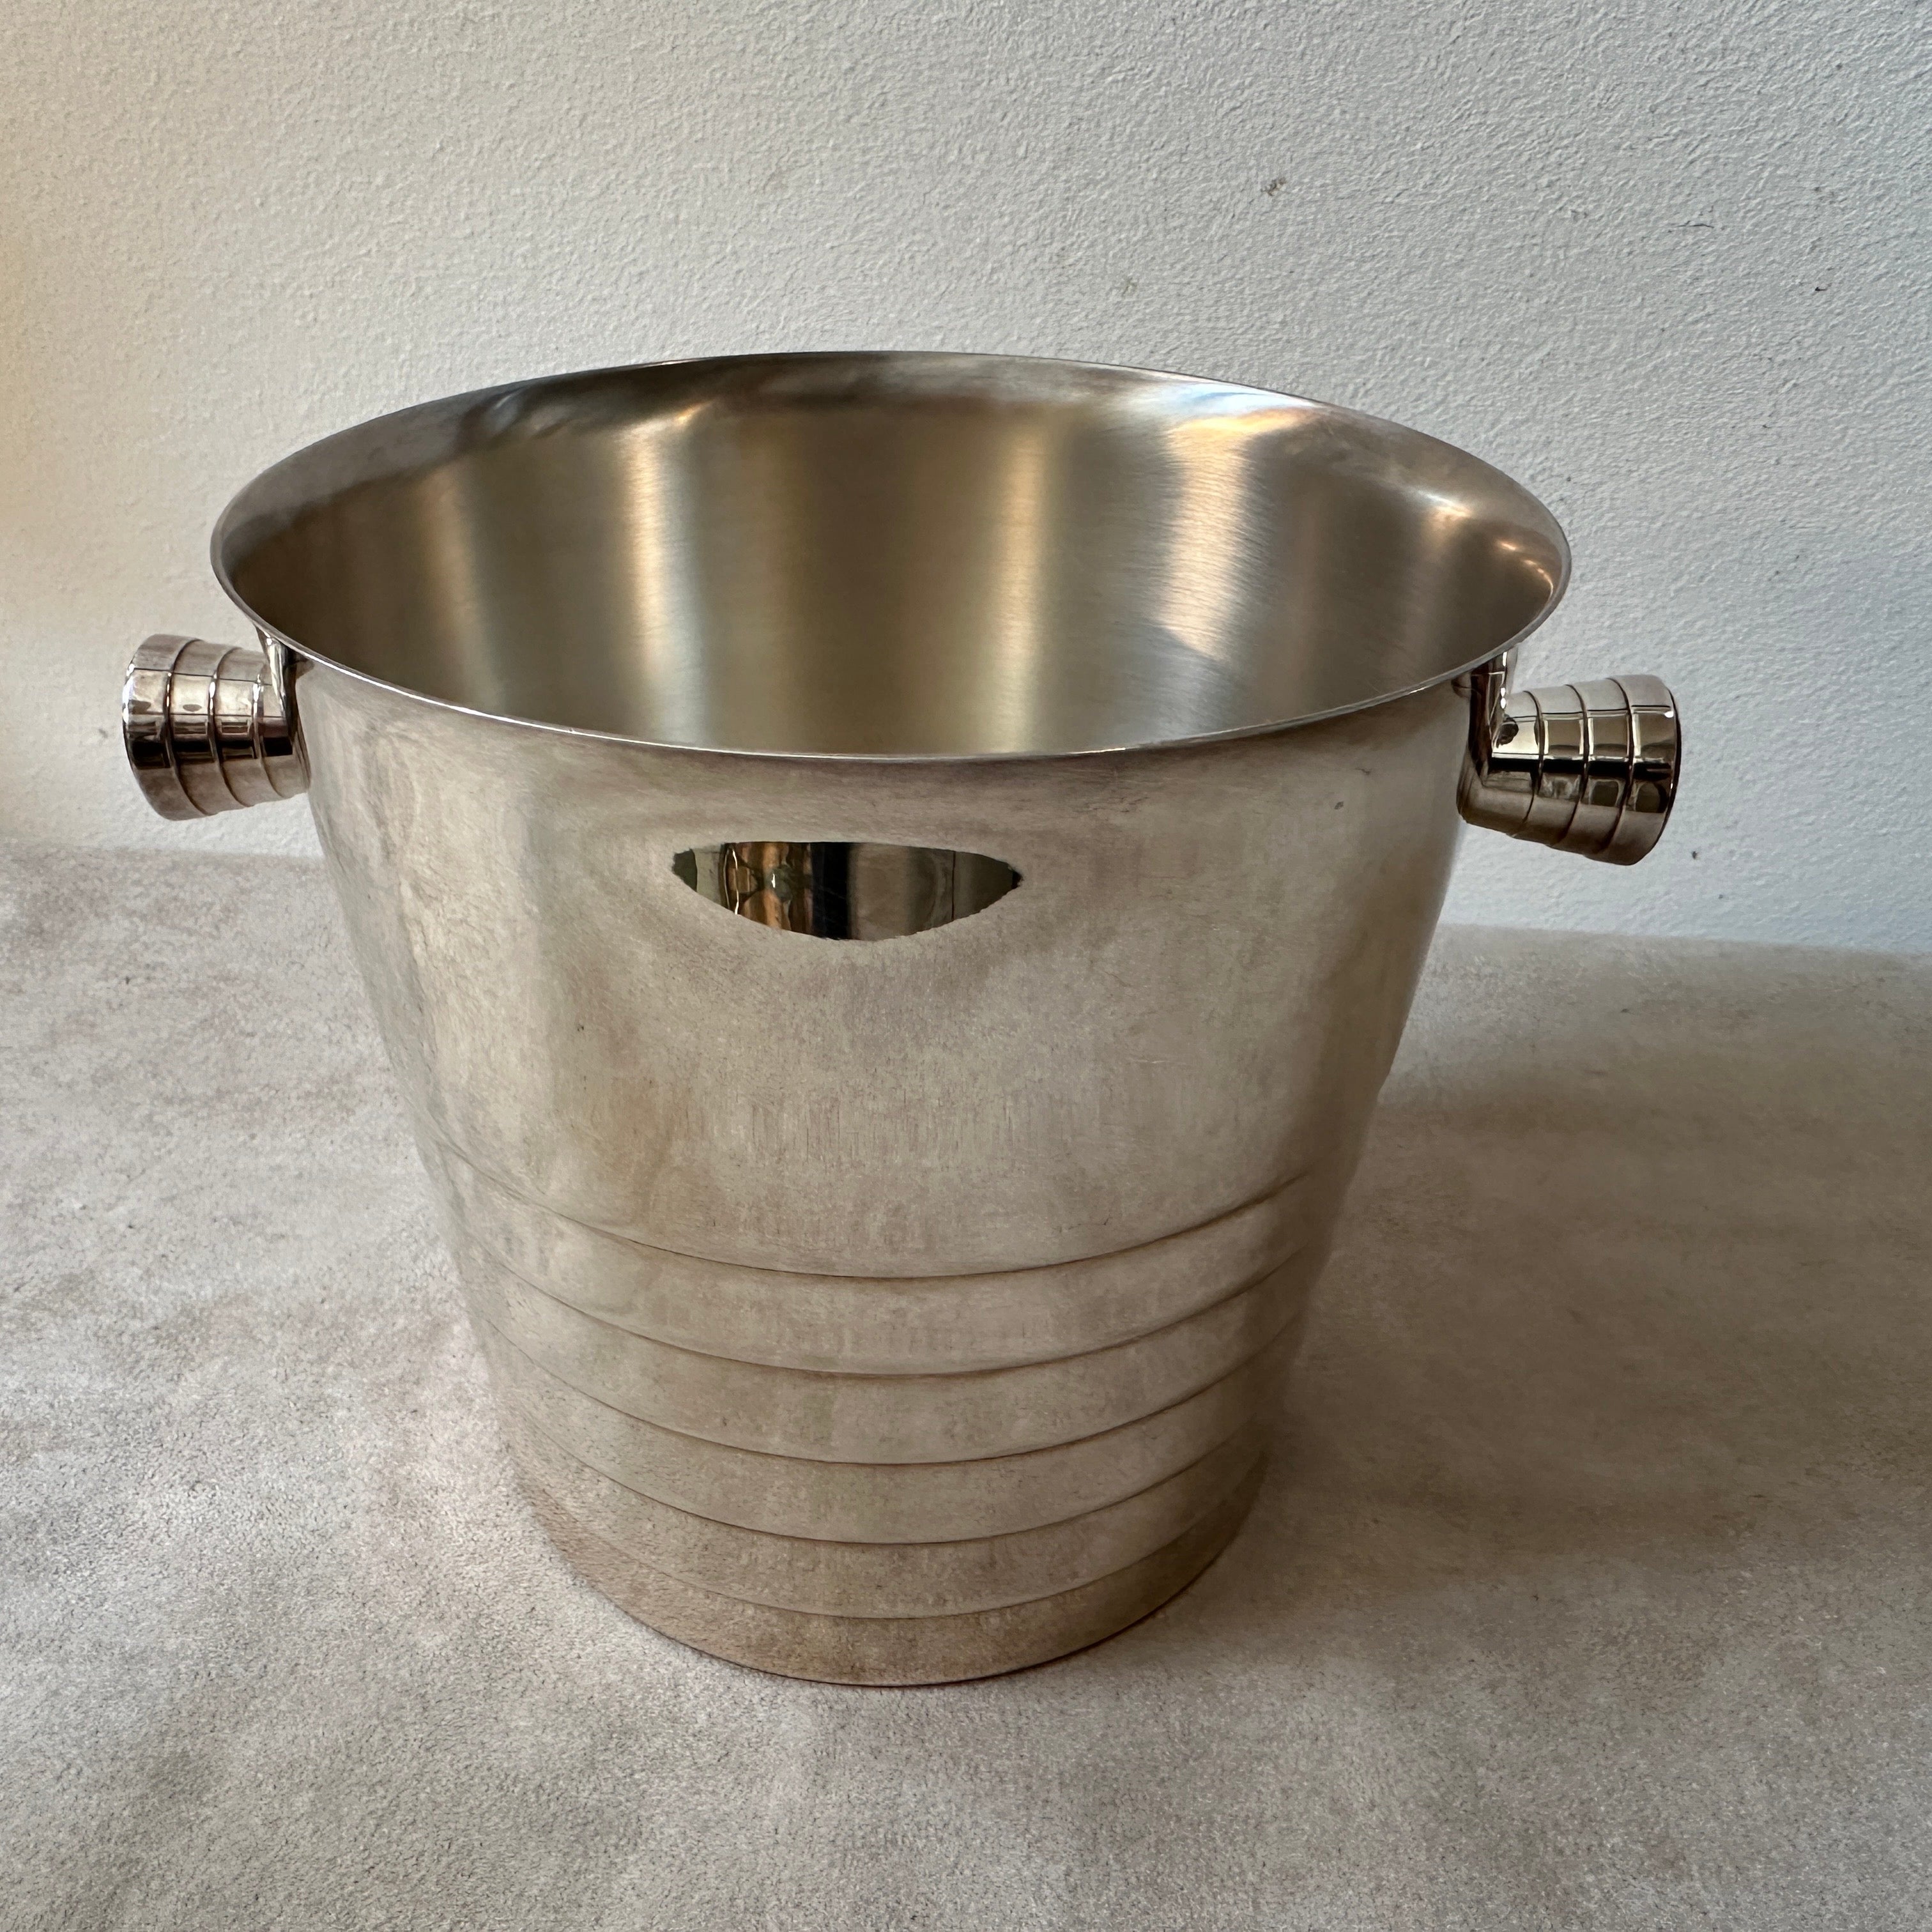 This French Ice Bucket by Christofle is a sleek and elegant piece of barware, reflecting the minimalist and contemporary design trends of the era. It has been crafted from high-quality silver-plated metal. Silver plating provides a luxurious finish